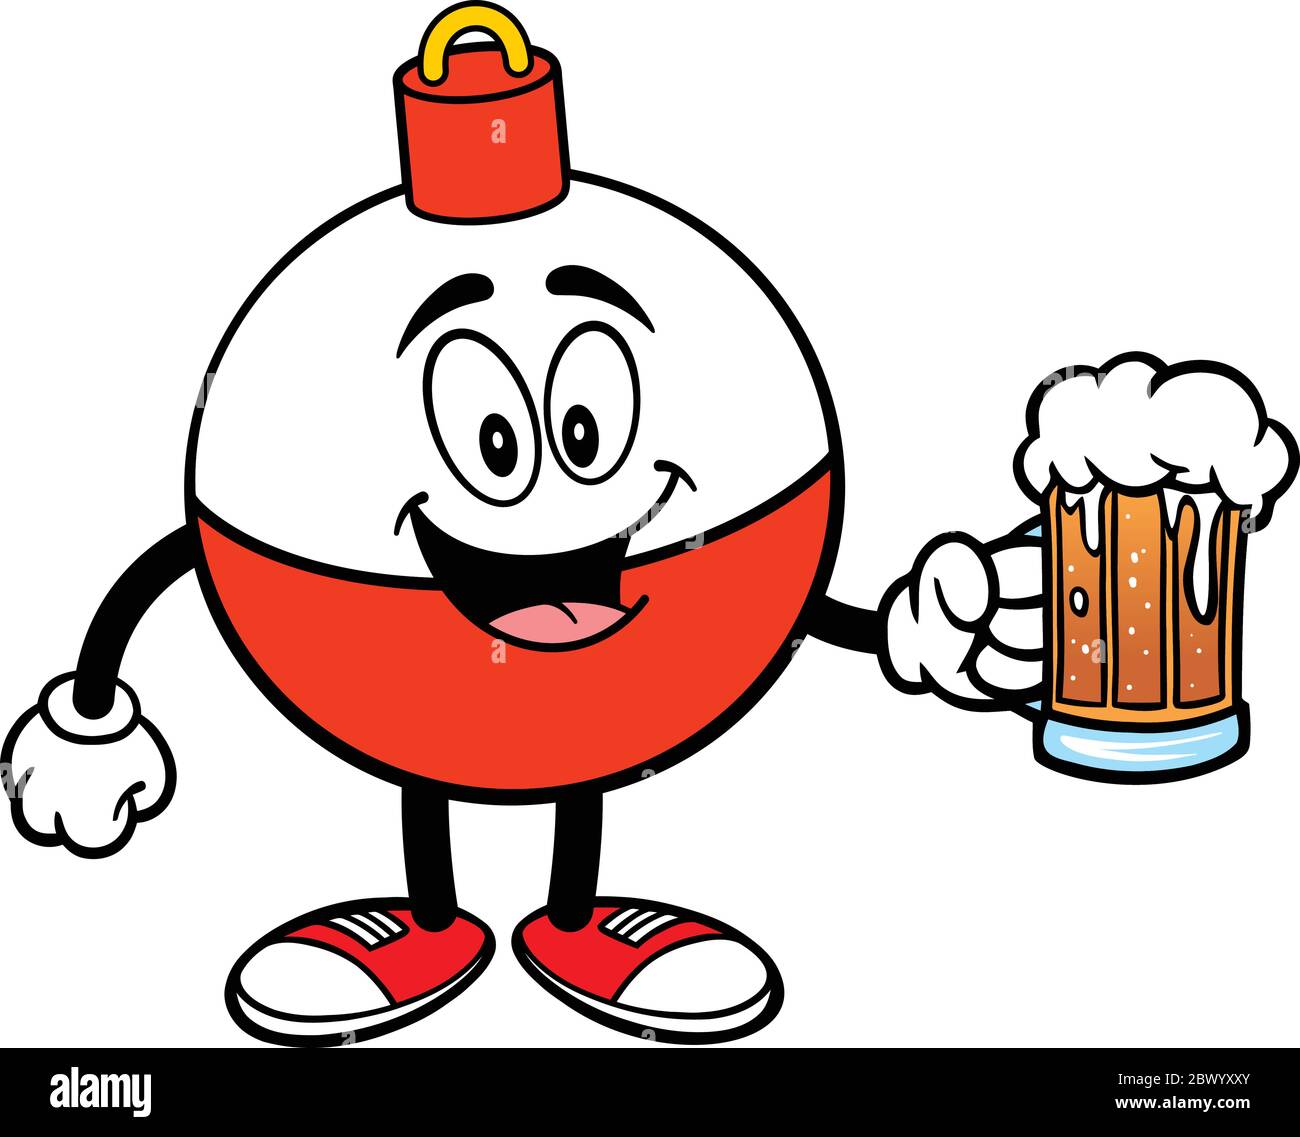 Fishing Bobber Mascot with Beer- A Cartoon Illustration of a